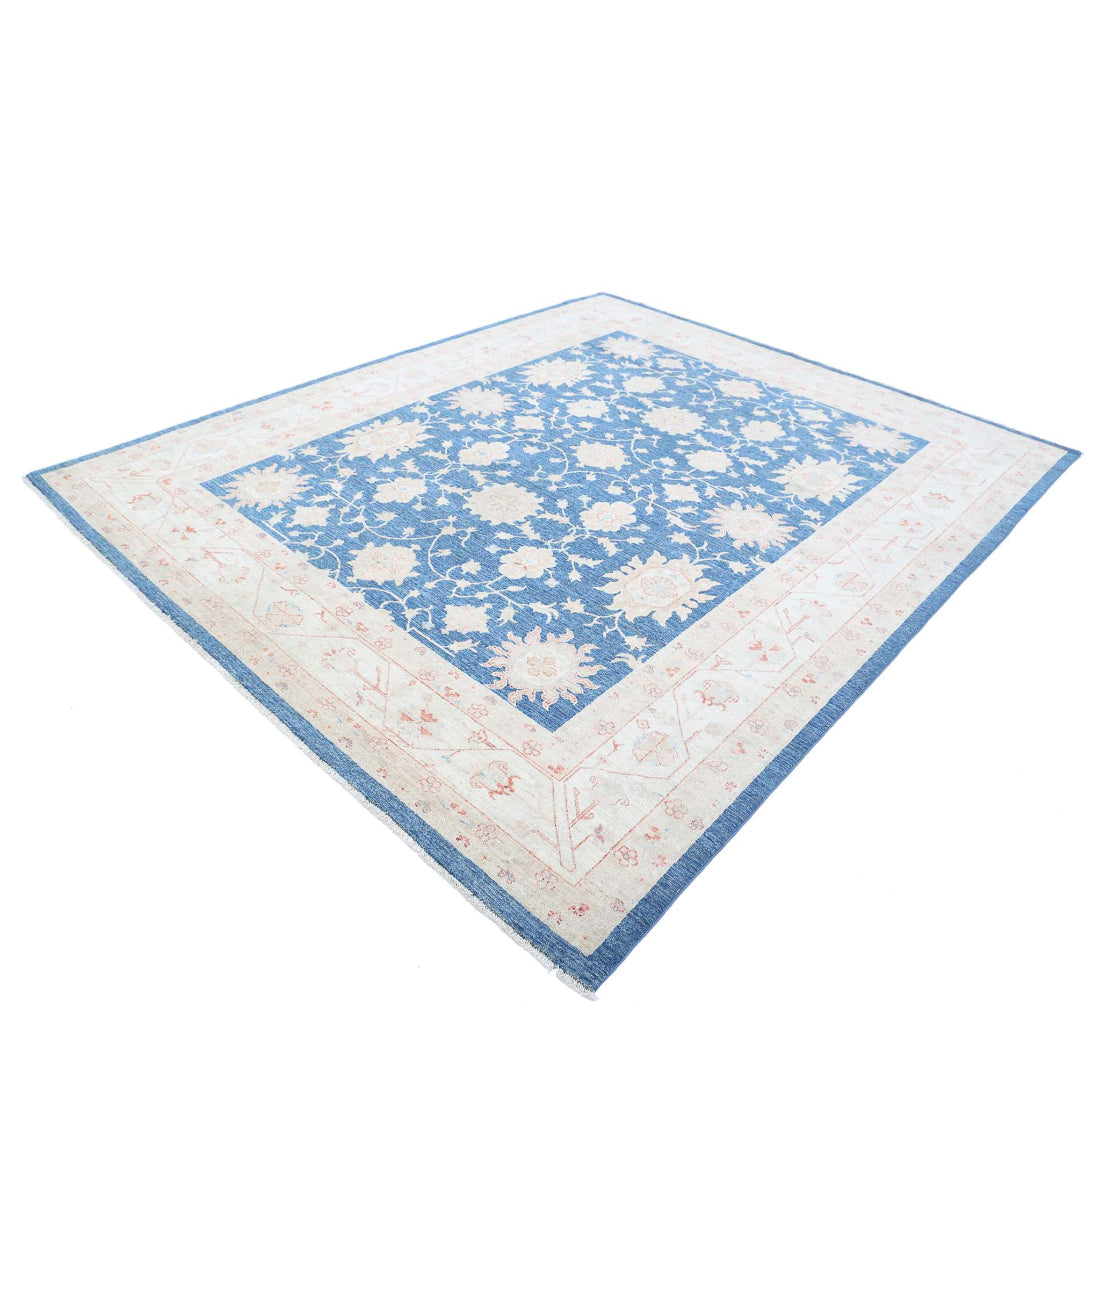 Ziegler 8'2'' X 9'8'' Hand-Knotted Wool Rug 8'2'' x 9'8'' (245 X 290) / Blue / Ivory